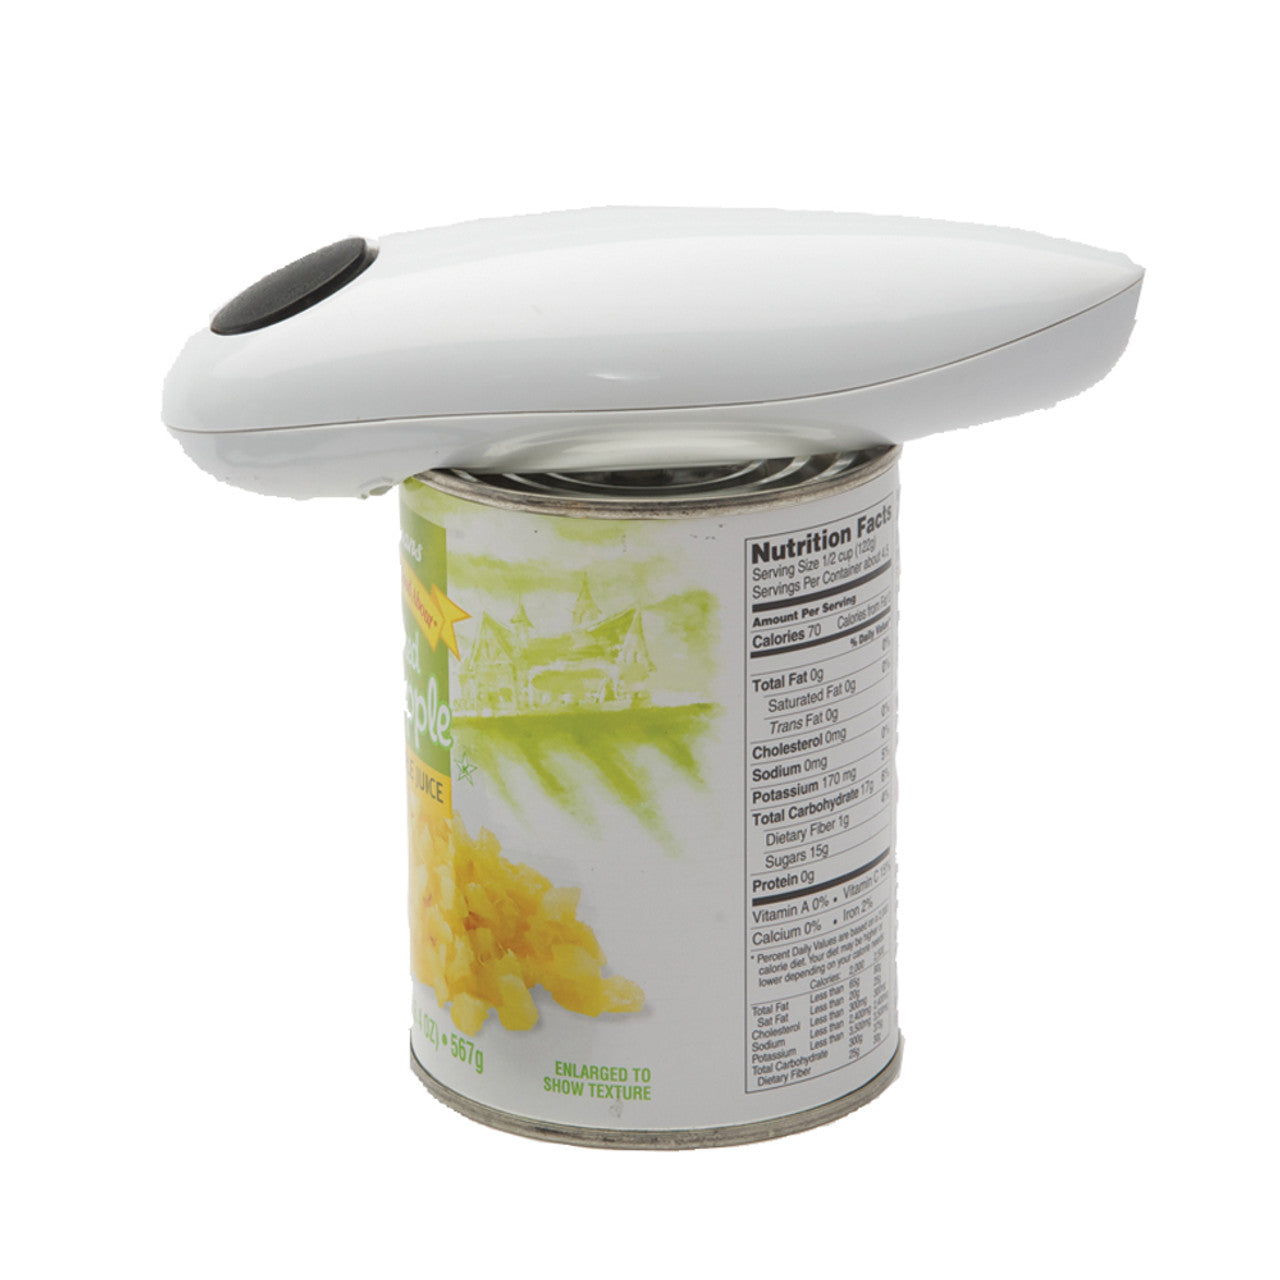 One Touch Automatic Electric Can Tin Jar Opener Portable Kitchen